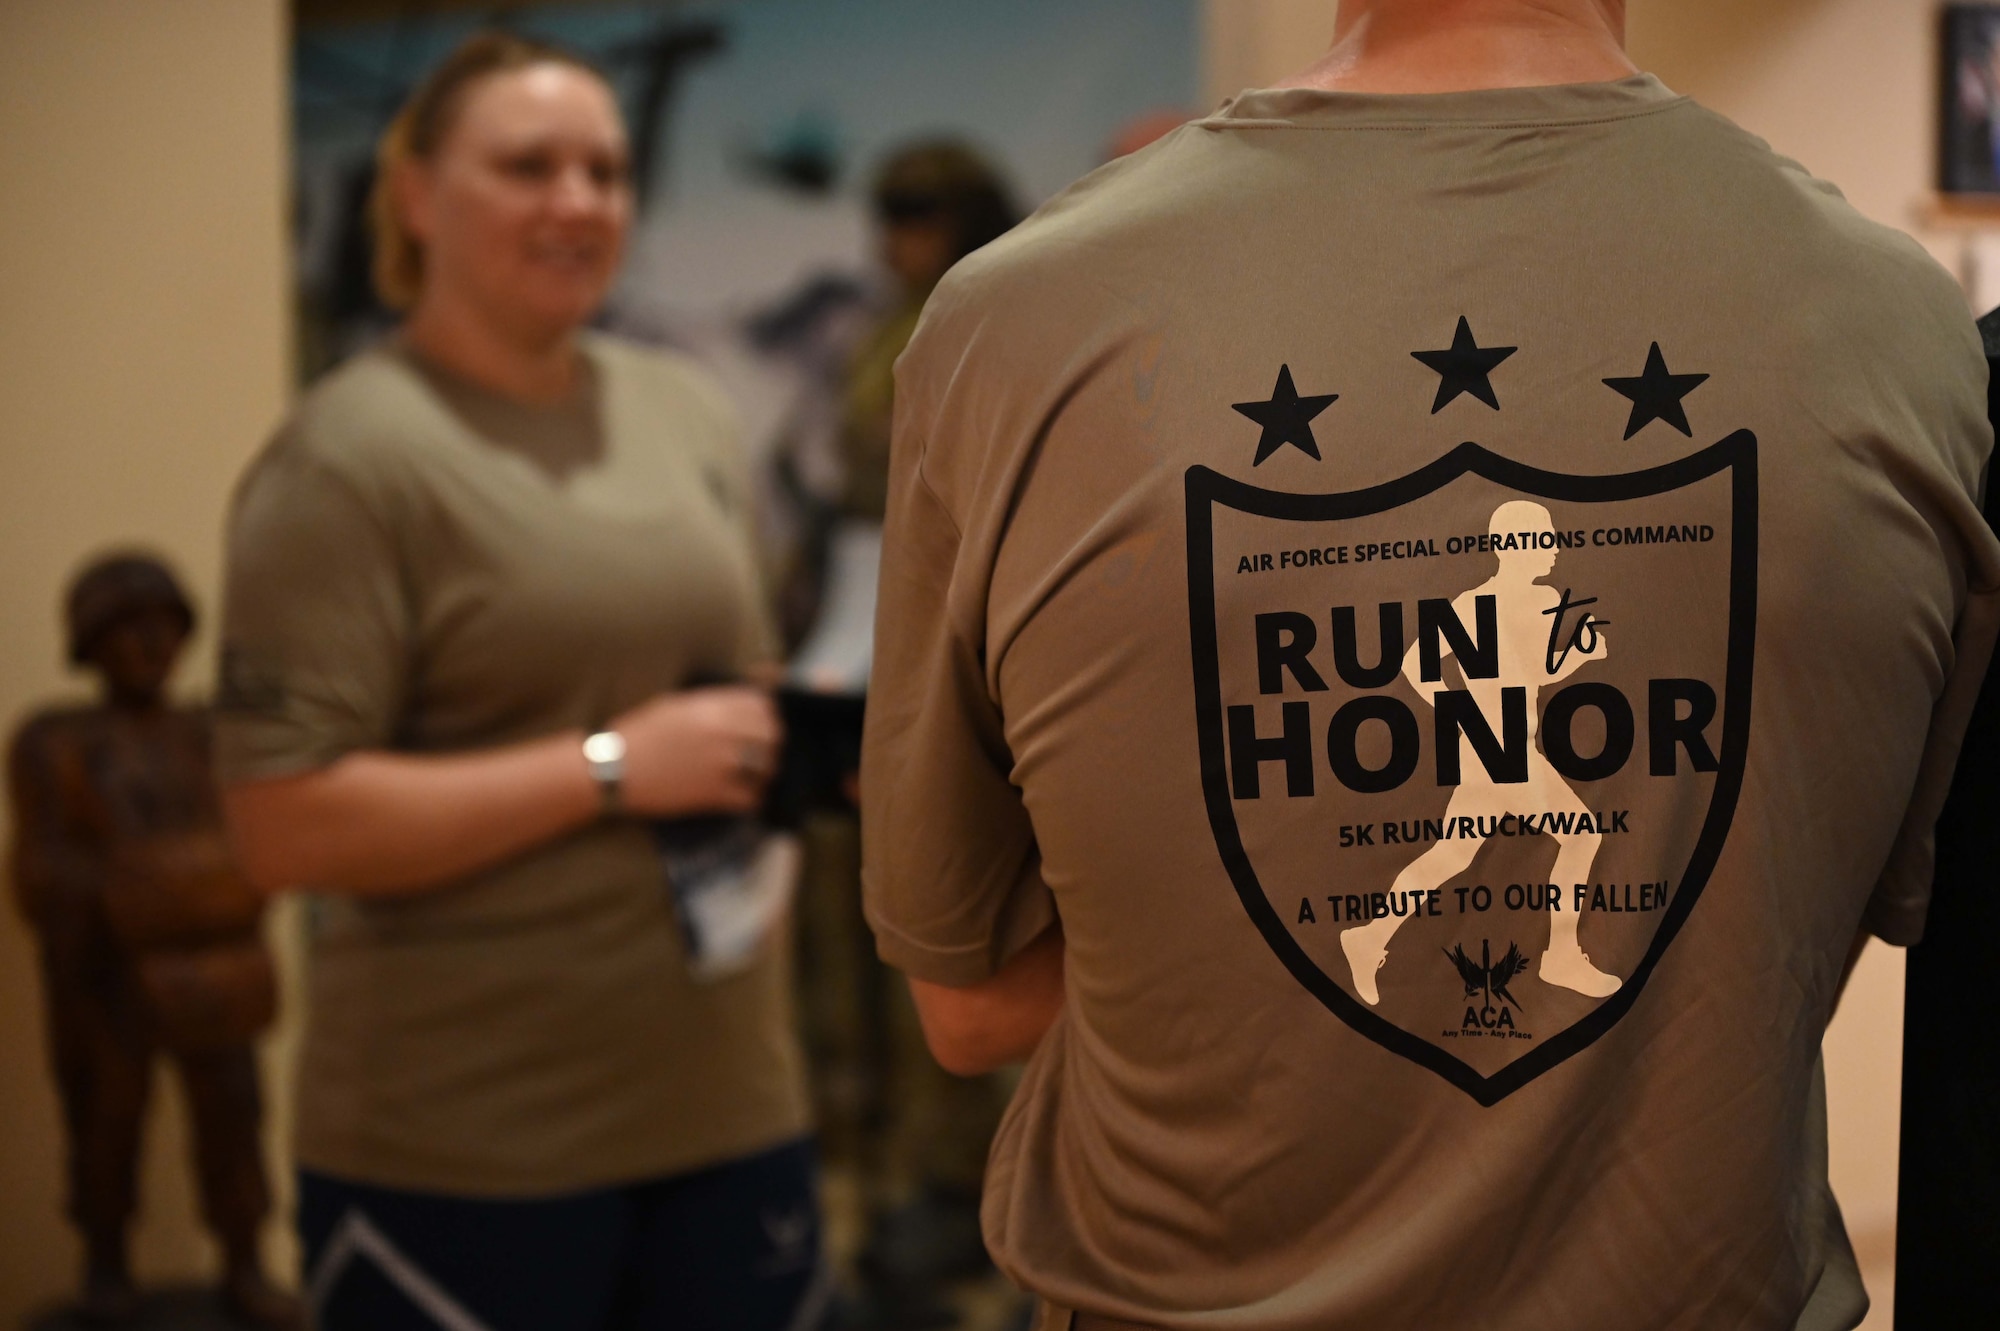 The 2022 Air Force Special Operations Command's Run to Honor 5K Run/Ruck took place at Hurlburt Field, Florida May 13, 2022. The command hosts the run/ruck as a tribute to AFSOC Airmen who have made the ultimate sacrifice in service to their country. (U.S. Air Force photo by Staff Sgt. Brandon Esau)